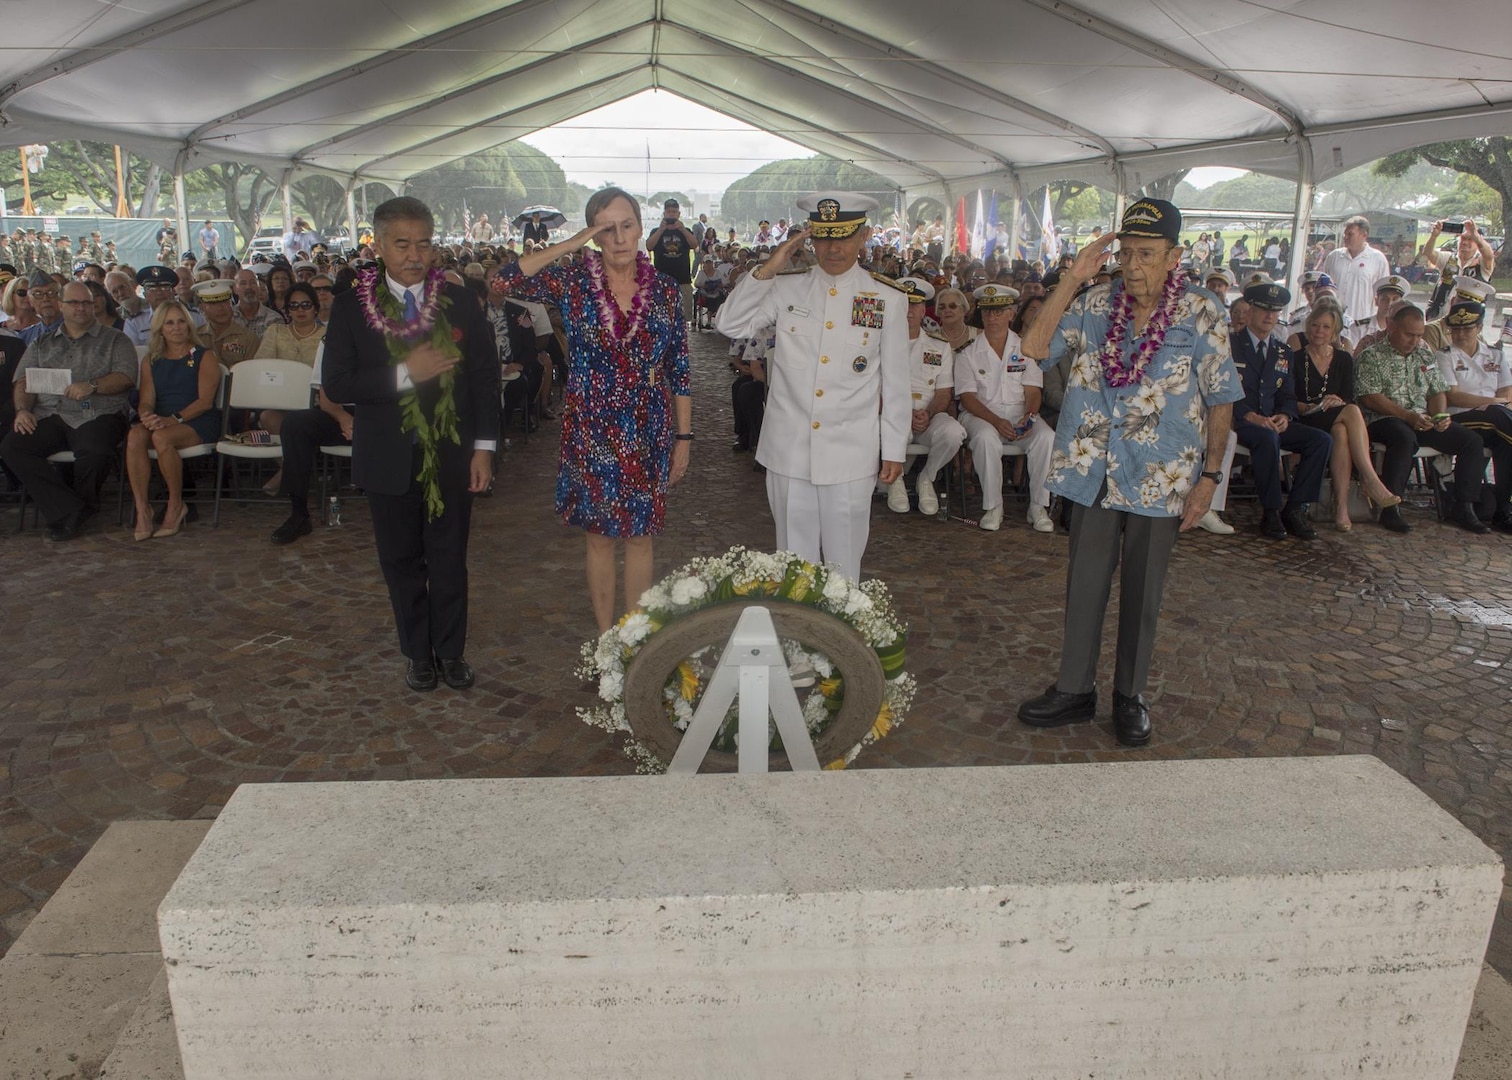 HONOLULU (Nov. 11, 2017)—From left to right, Governor of Hawaii, David Ige; former Army Capt. Mary McEldowney; Commander U.S. Pacific Command, Adm. Harry Harris, and Navy Capt. John Woolston (ret.) lay a wreath during a Veterans Day ceremony held at the National Memorial Cemetery of the Pacific. The ceremony recognized and gave thanks to all the veterans who have served and continue to serve the military and their families. (U.S. Navy photo by Mass Communication Specialist 2nd Class Robin W. Peak)